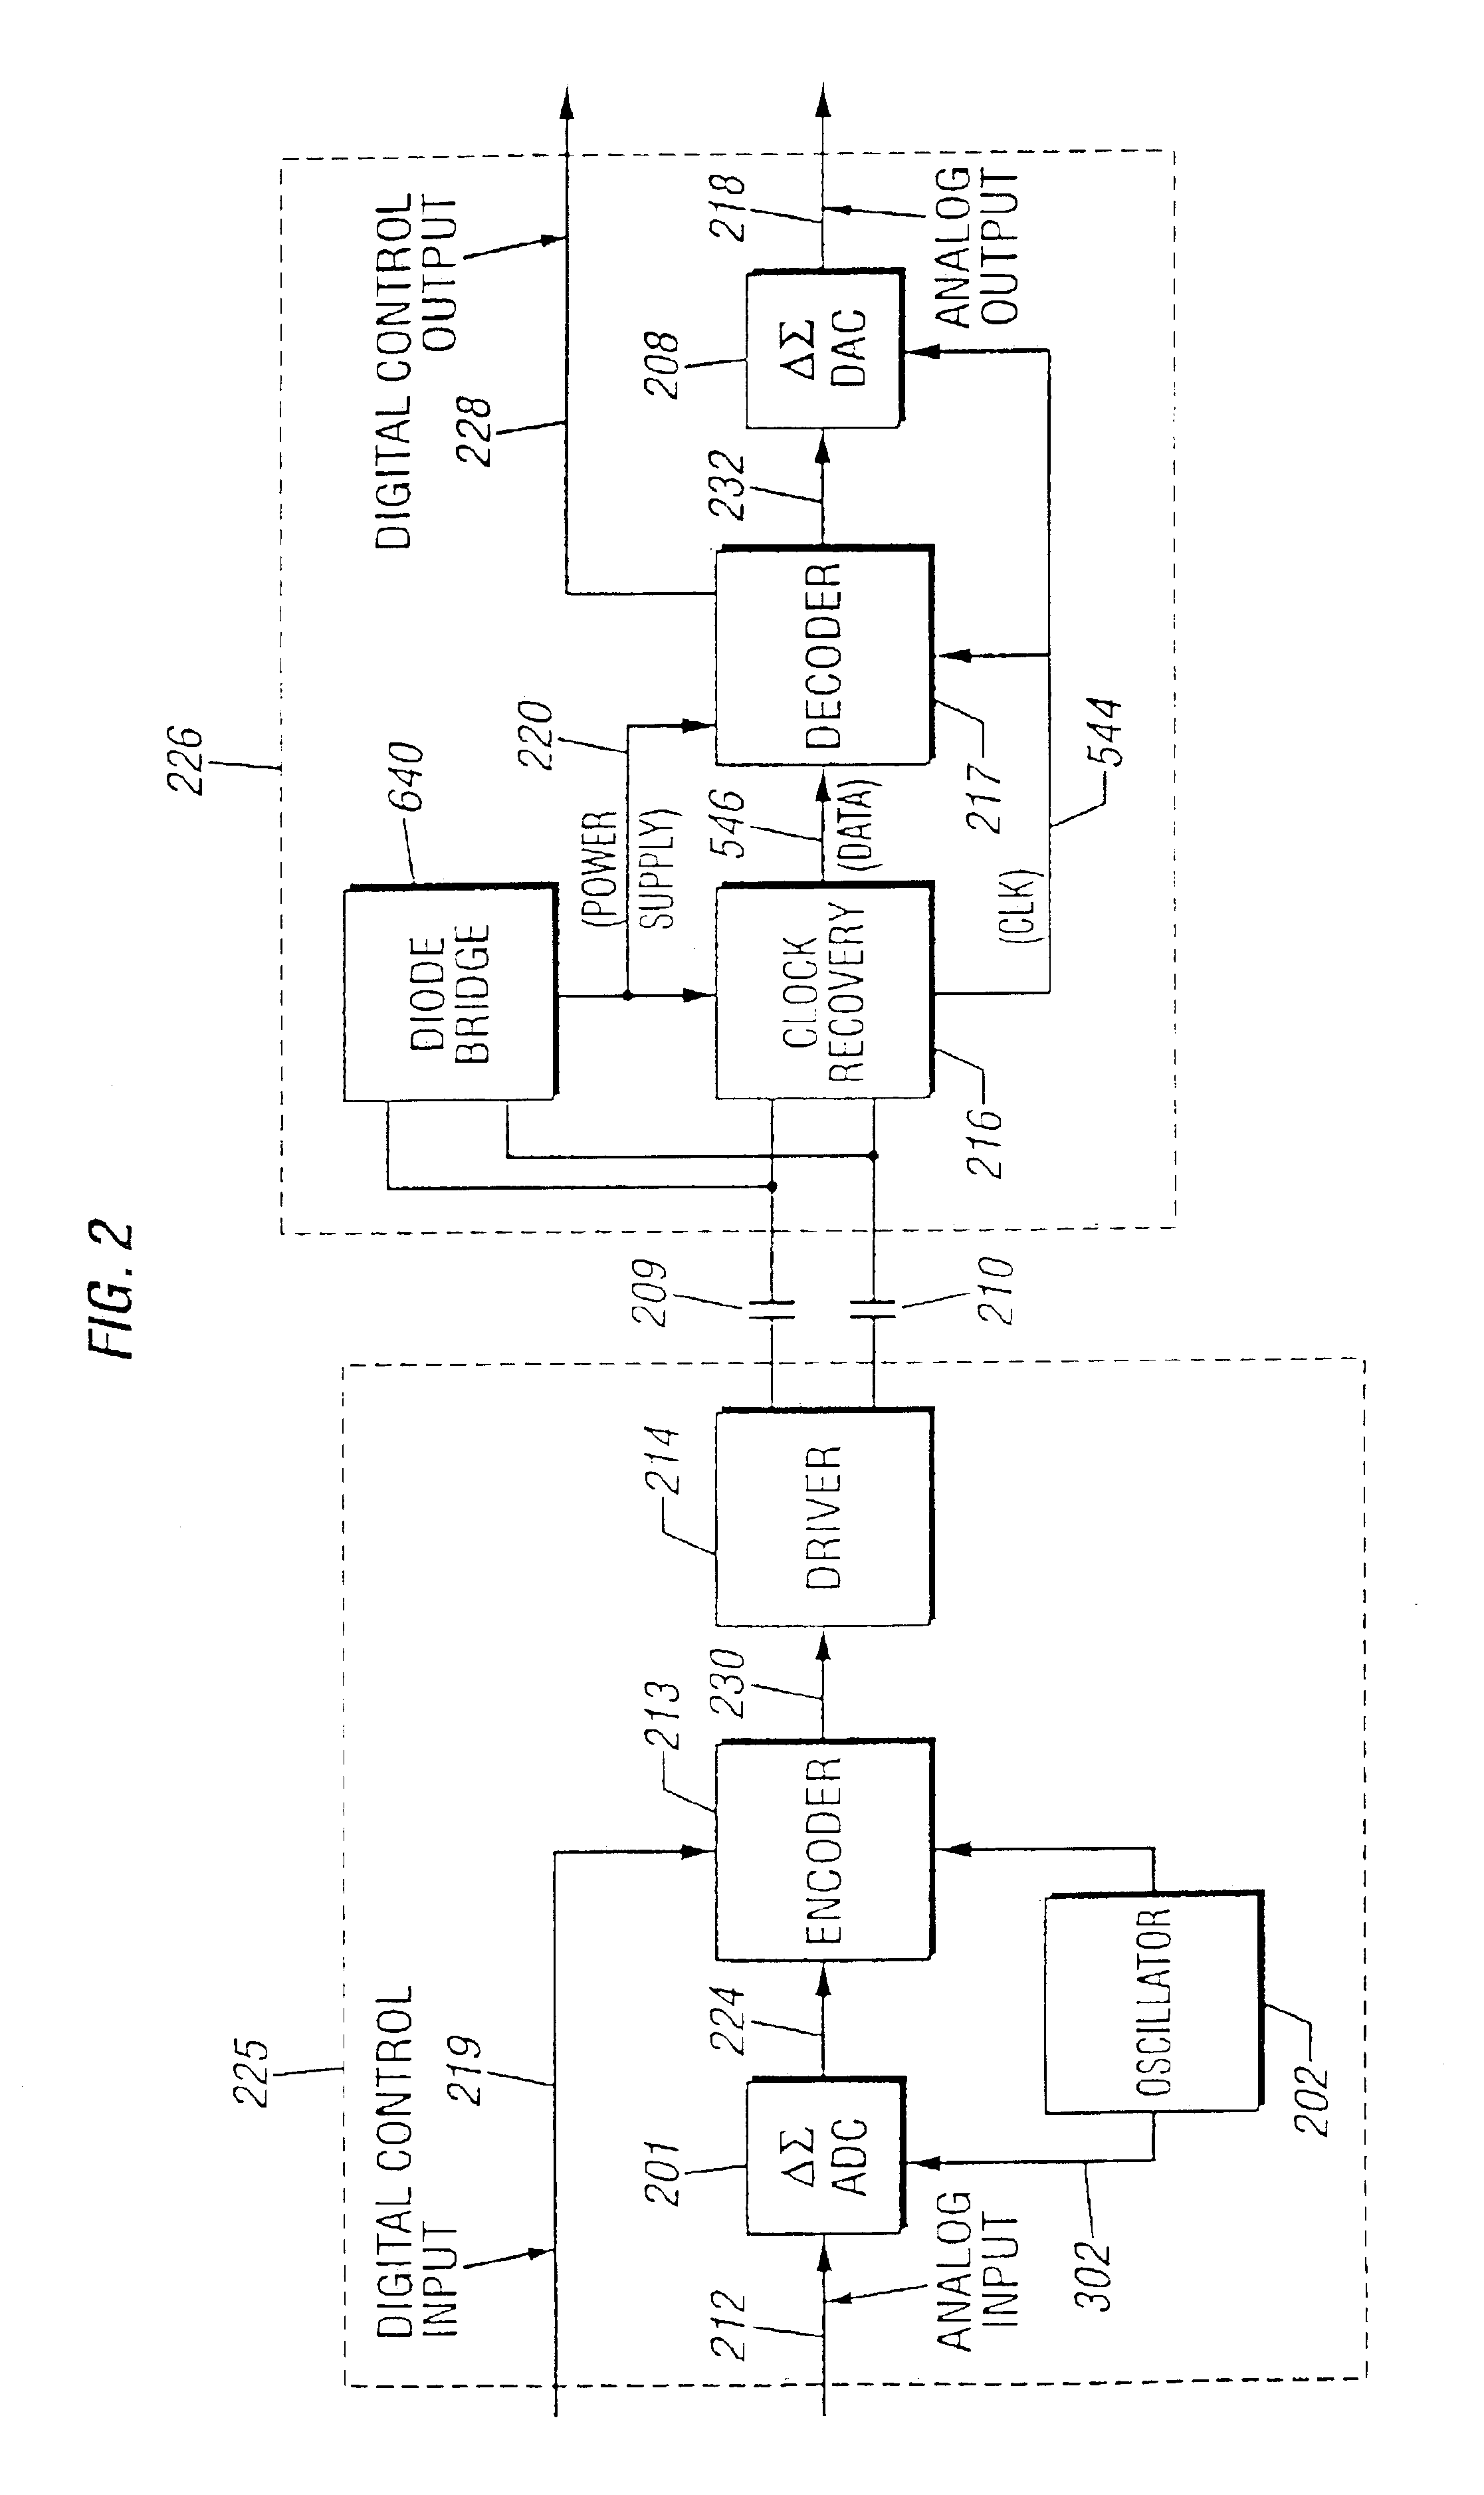 Loop current monitor circuitry and method for a communication system